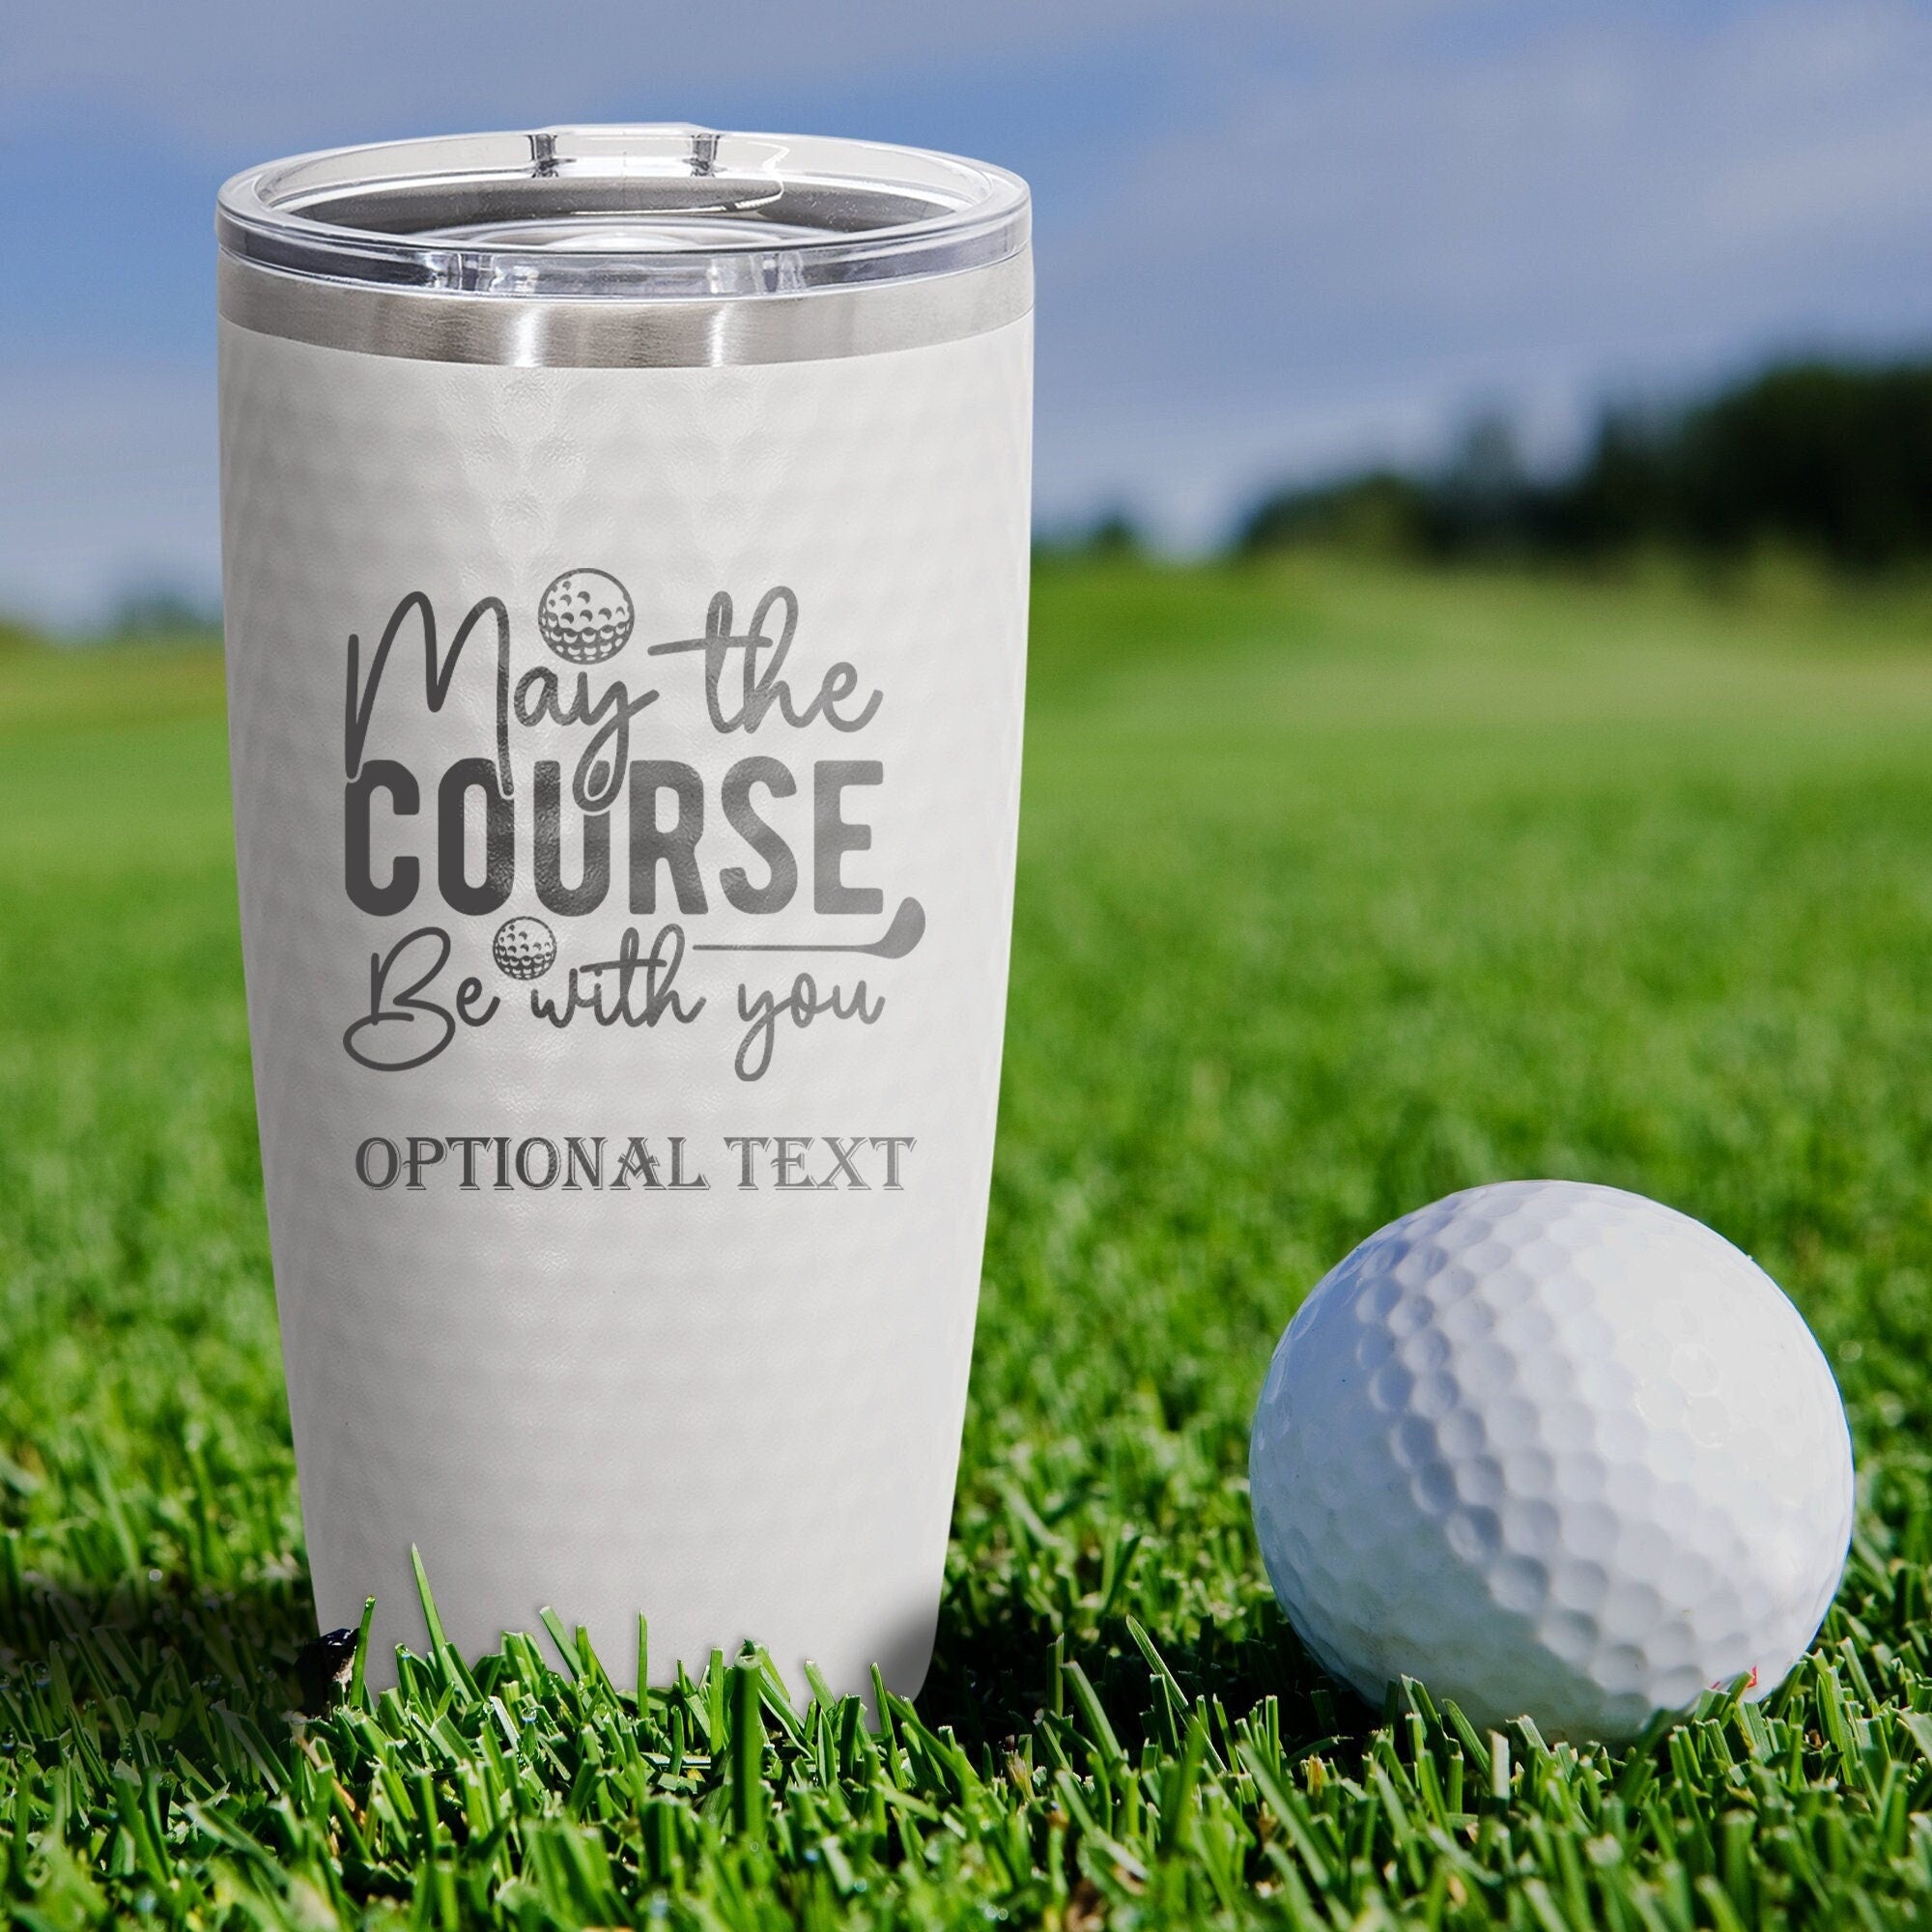 Weekend Forecast: Golf With Chance Of Beer - Engraved Stainless Steel  Tumbler, Funny Golf Gifts For Men, Funny Golfing Mug